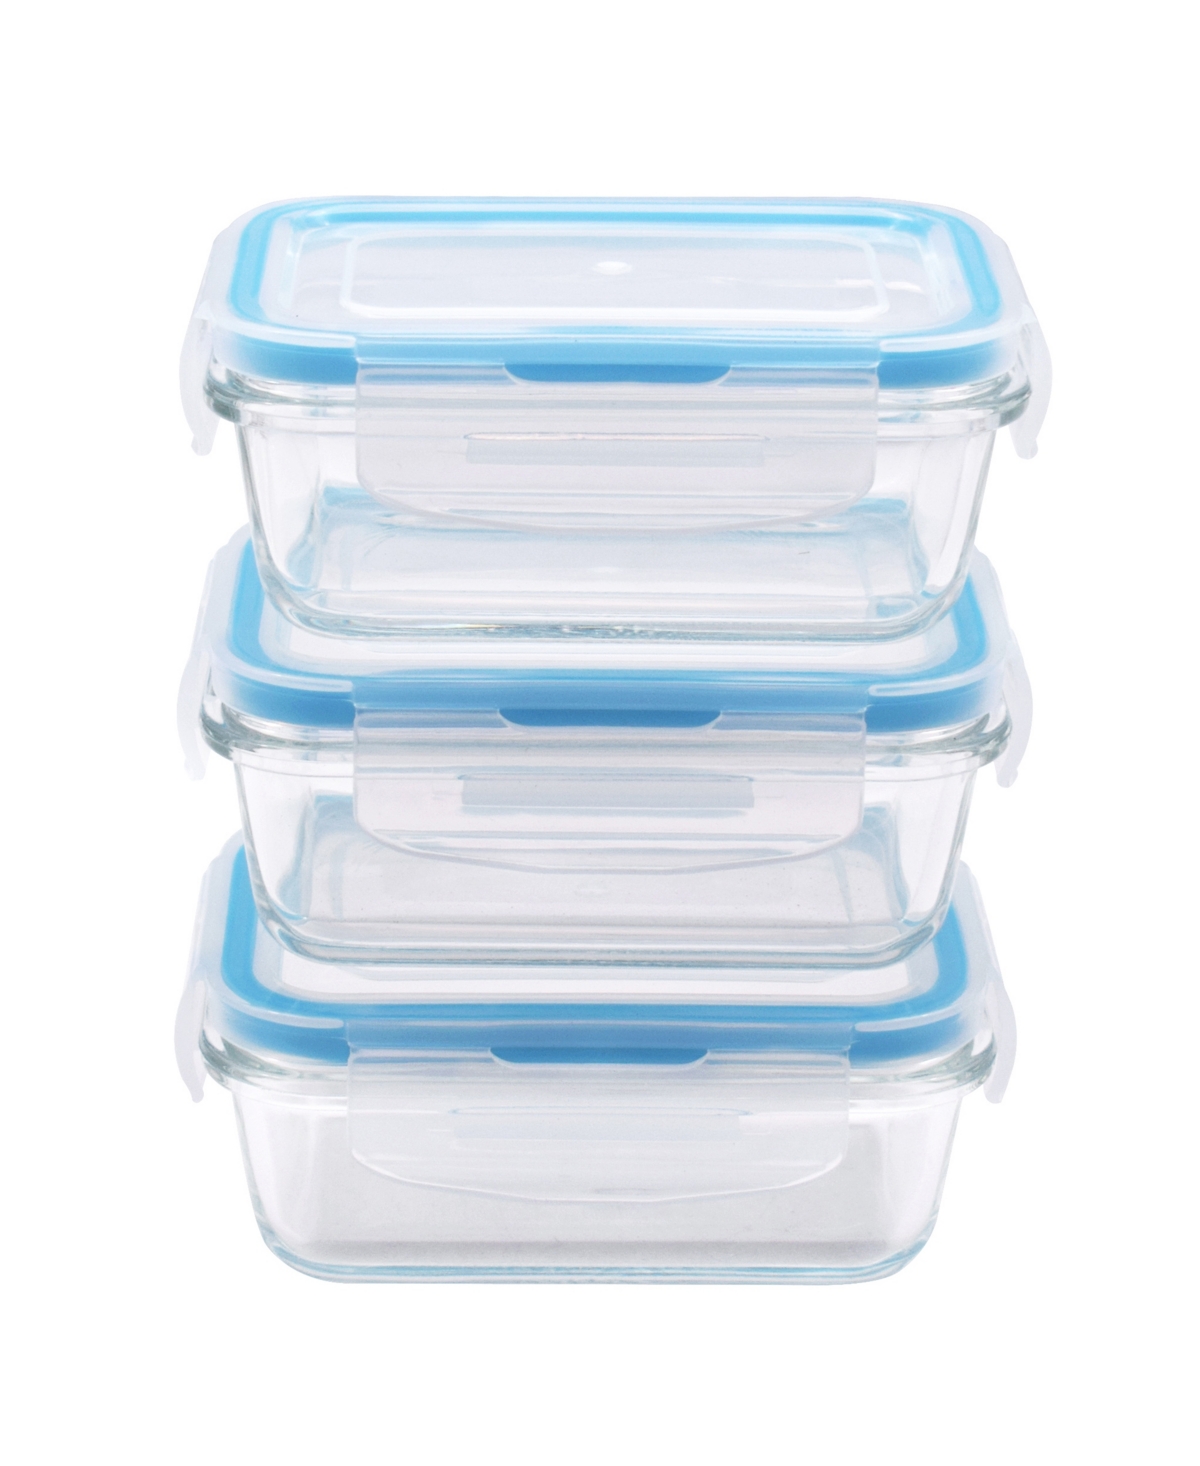 Art & Cook 3 Piece Rectangle 330 ml Food Storage With Locking Lid Set In Blue